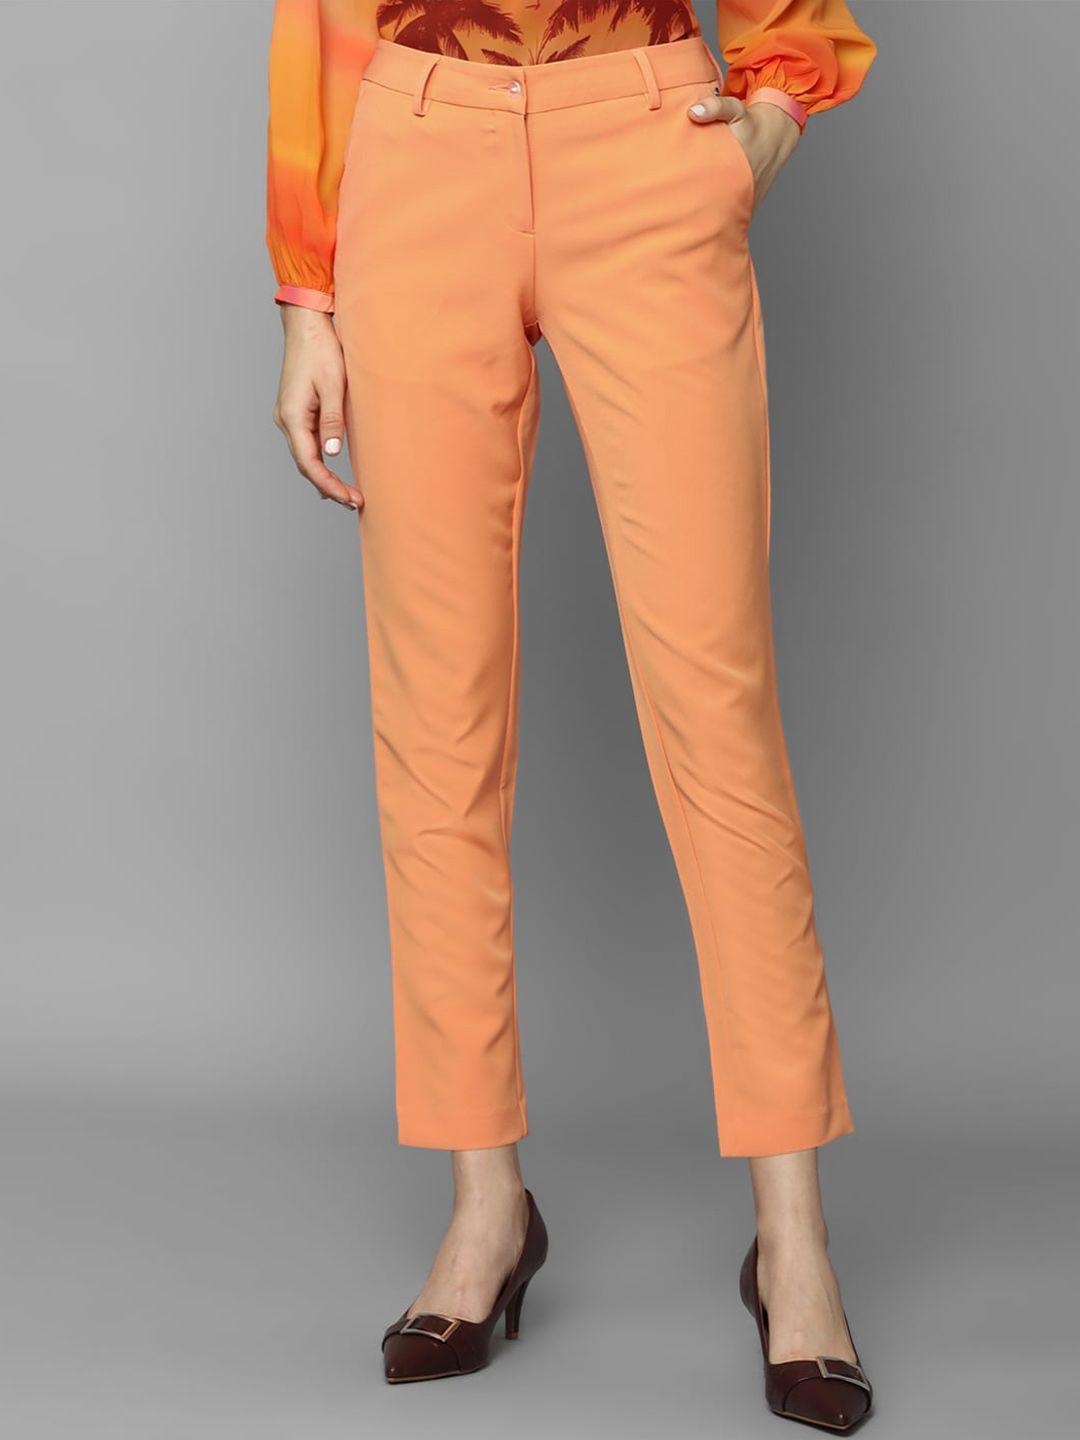 allen solly woman mid-rise trousers